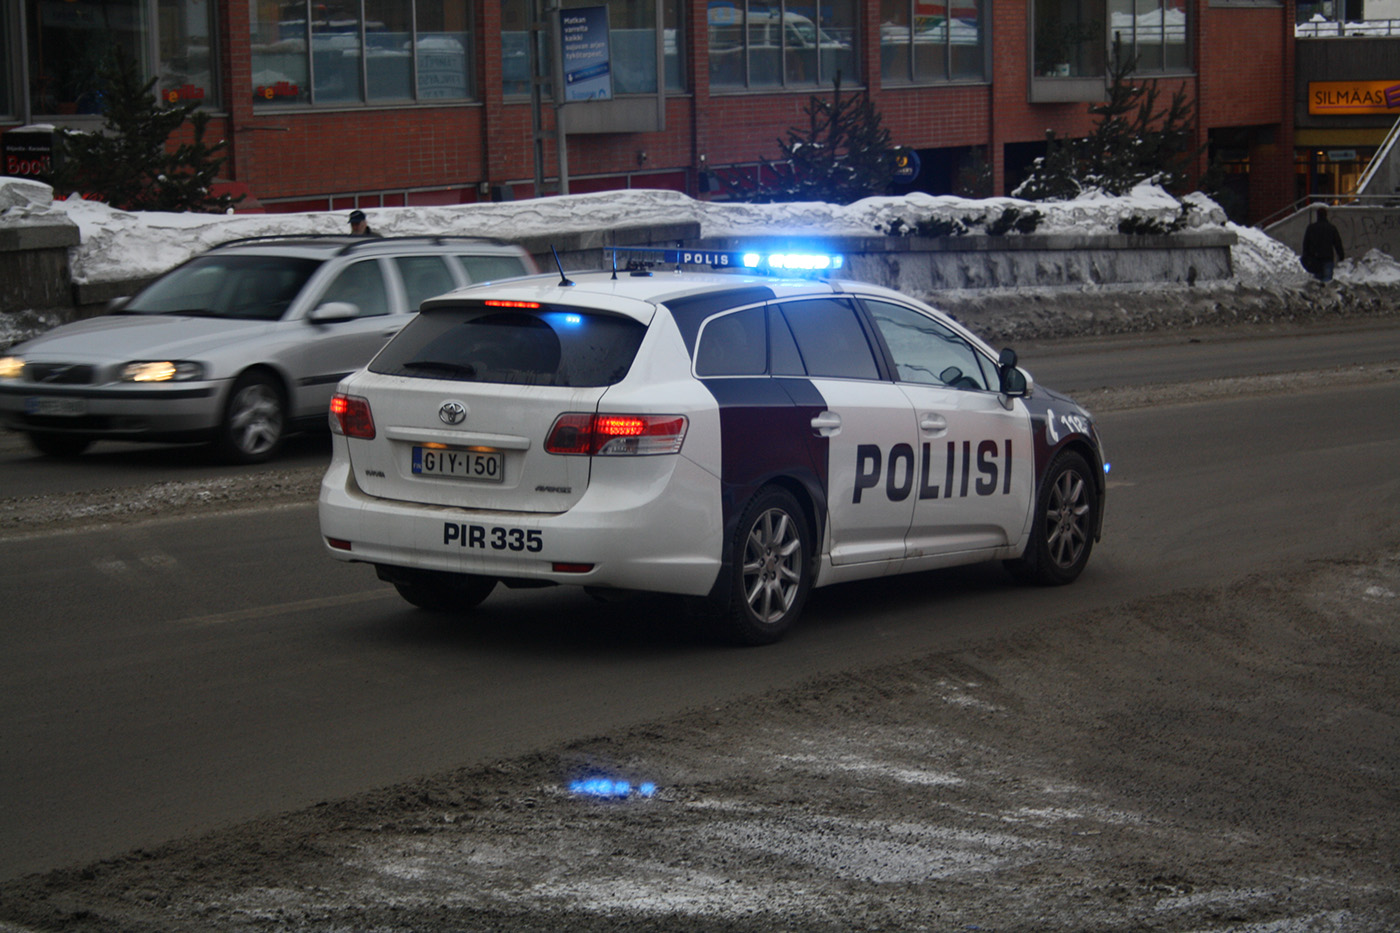 In Finland, speeding tickets are determined by the driver’s annual income. 

Once, a man received a $200,000 fine when driving 50mph in a 25mph zone.